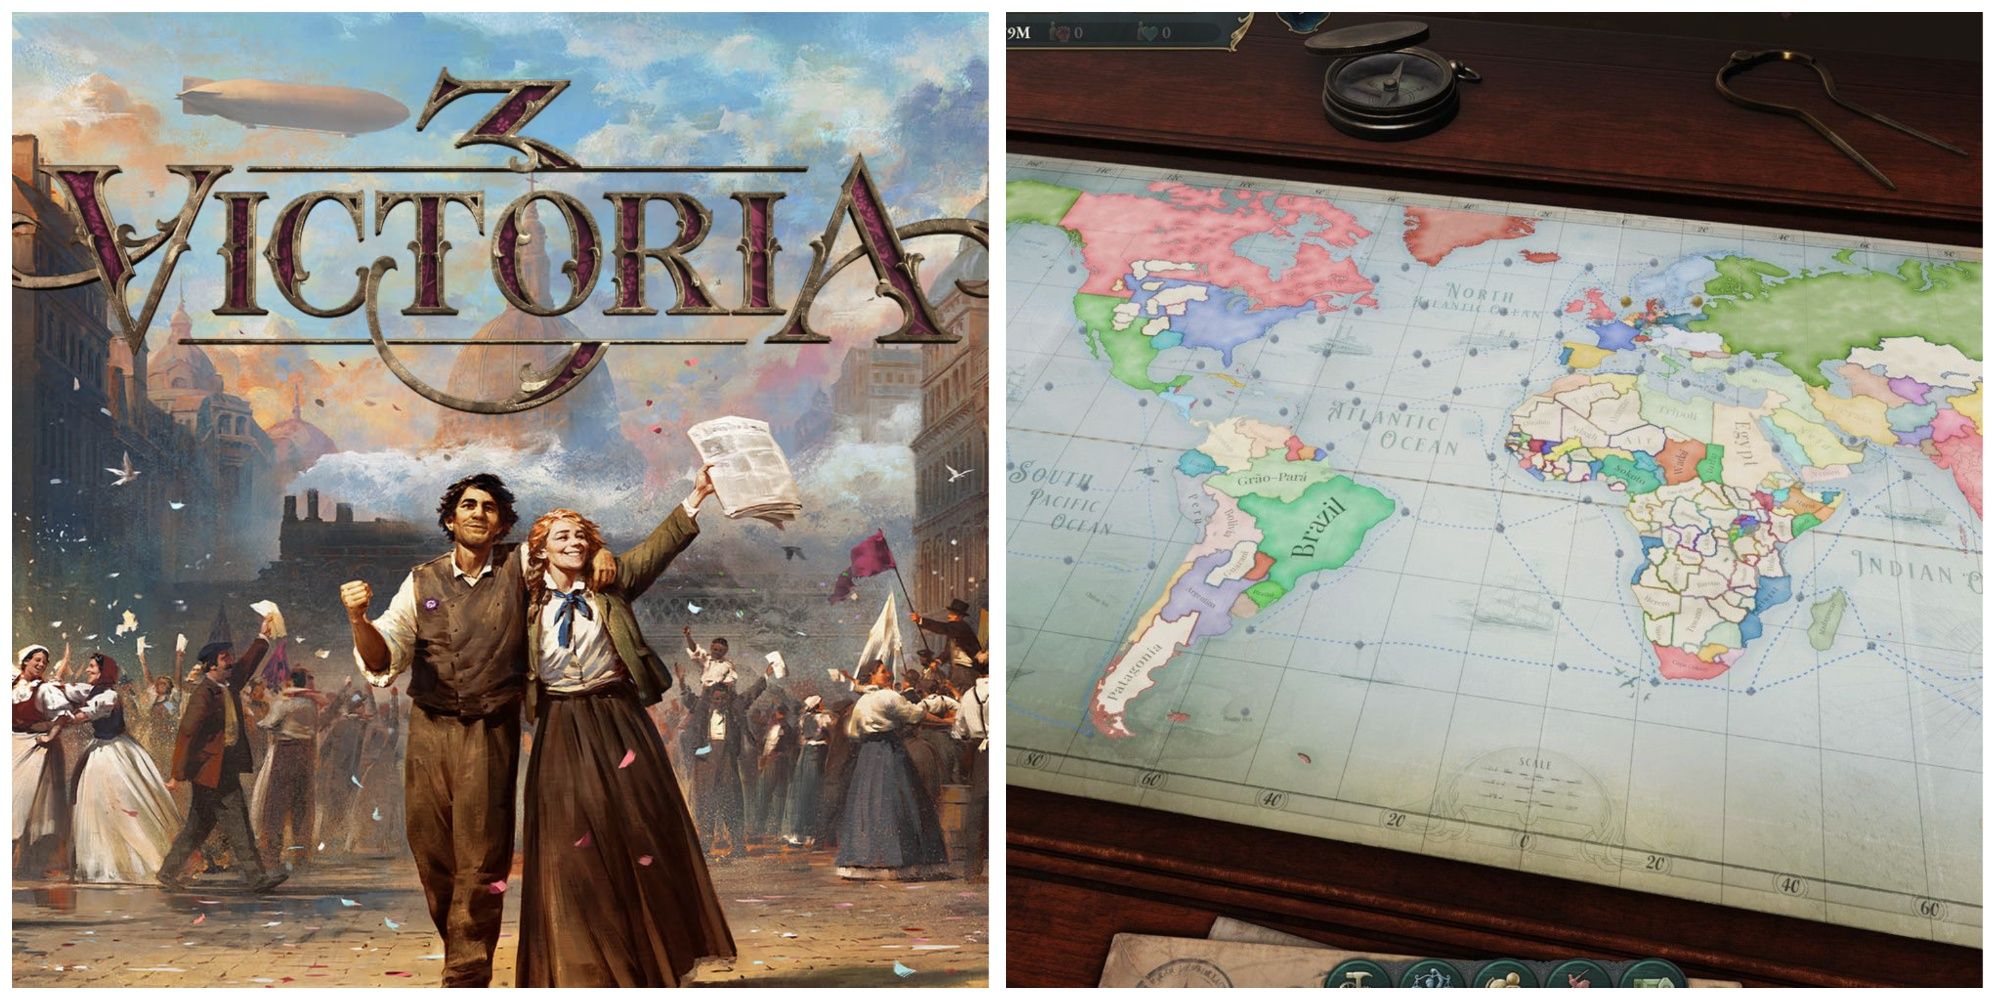 A split image of Victoria 3 cover art and a world map